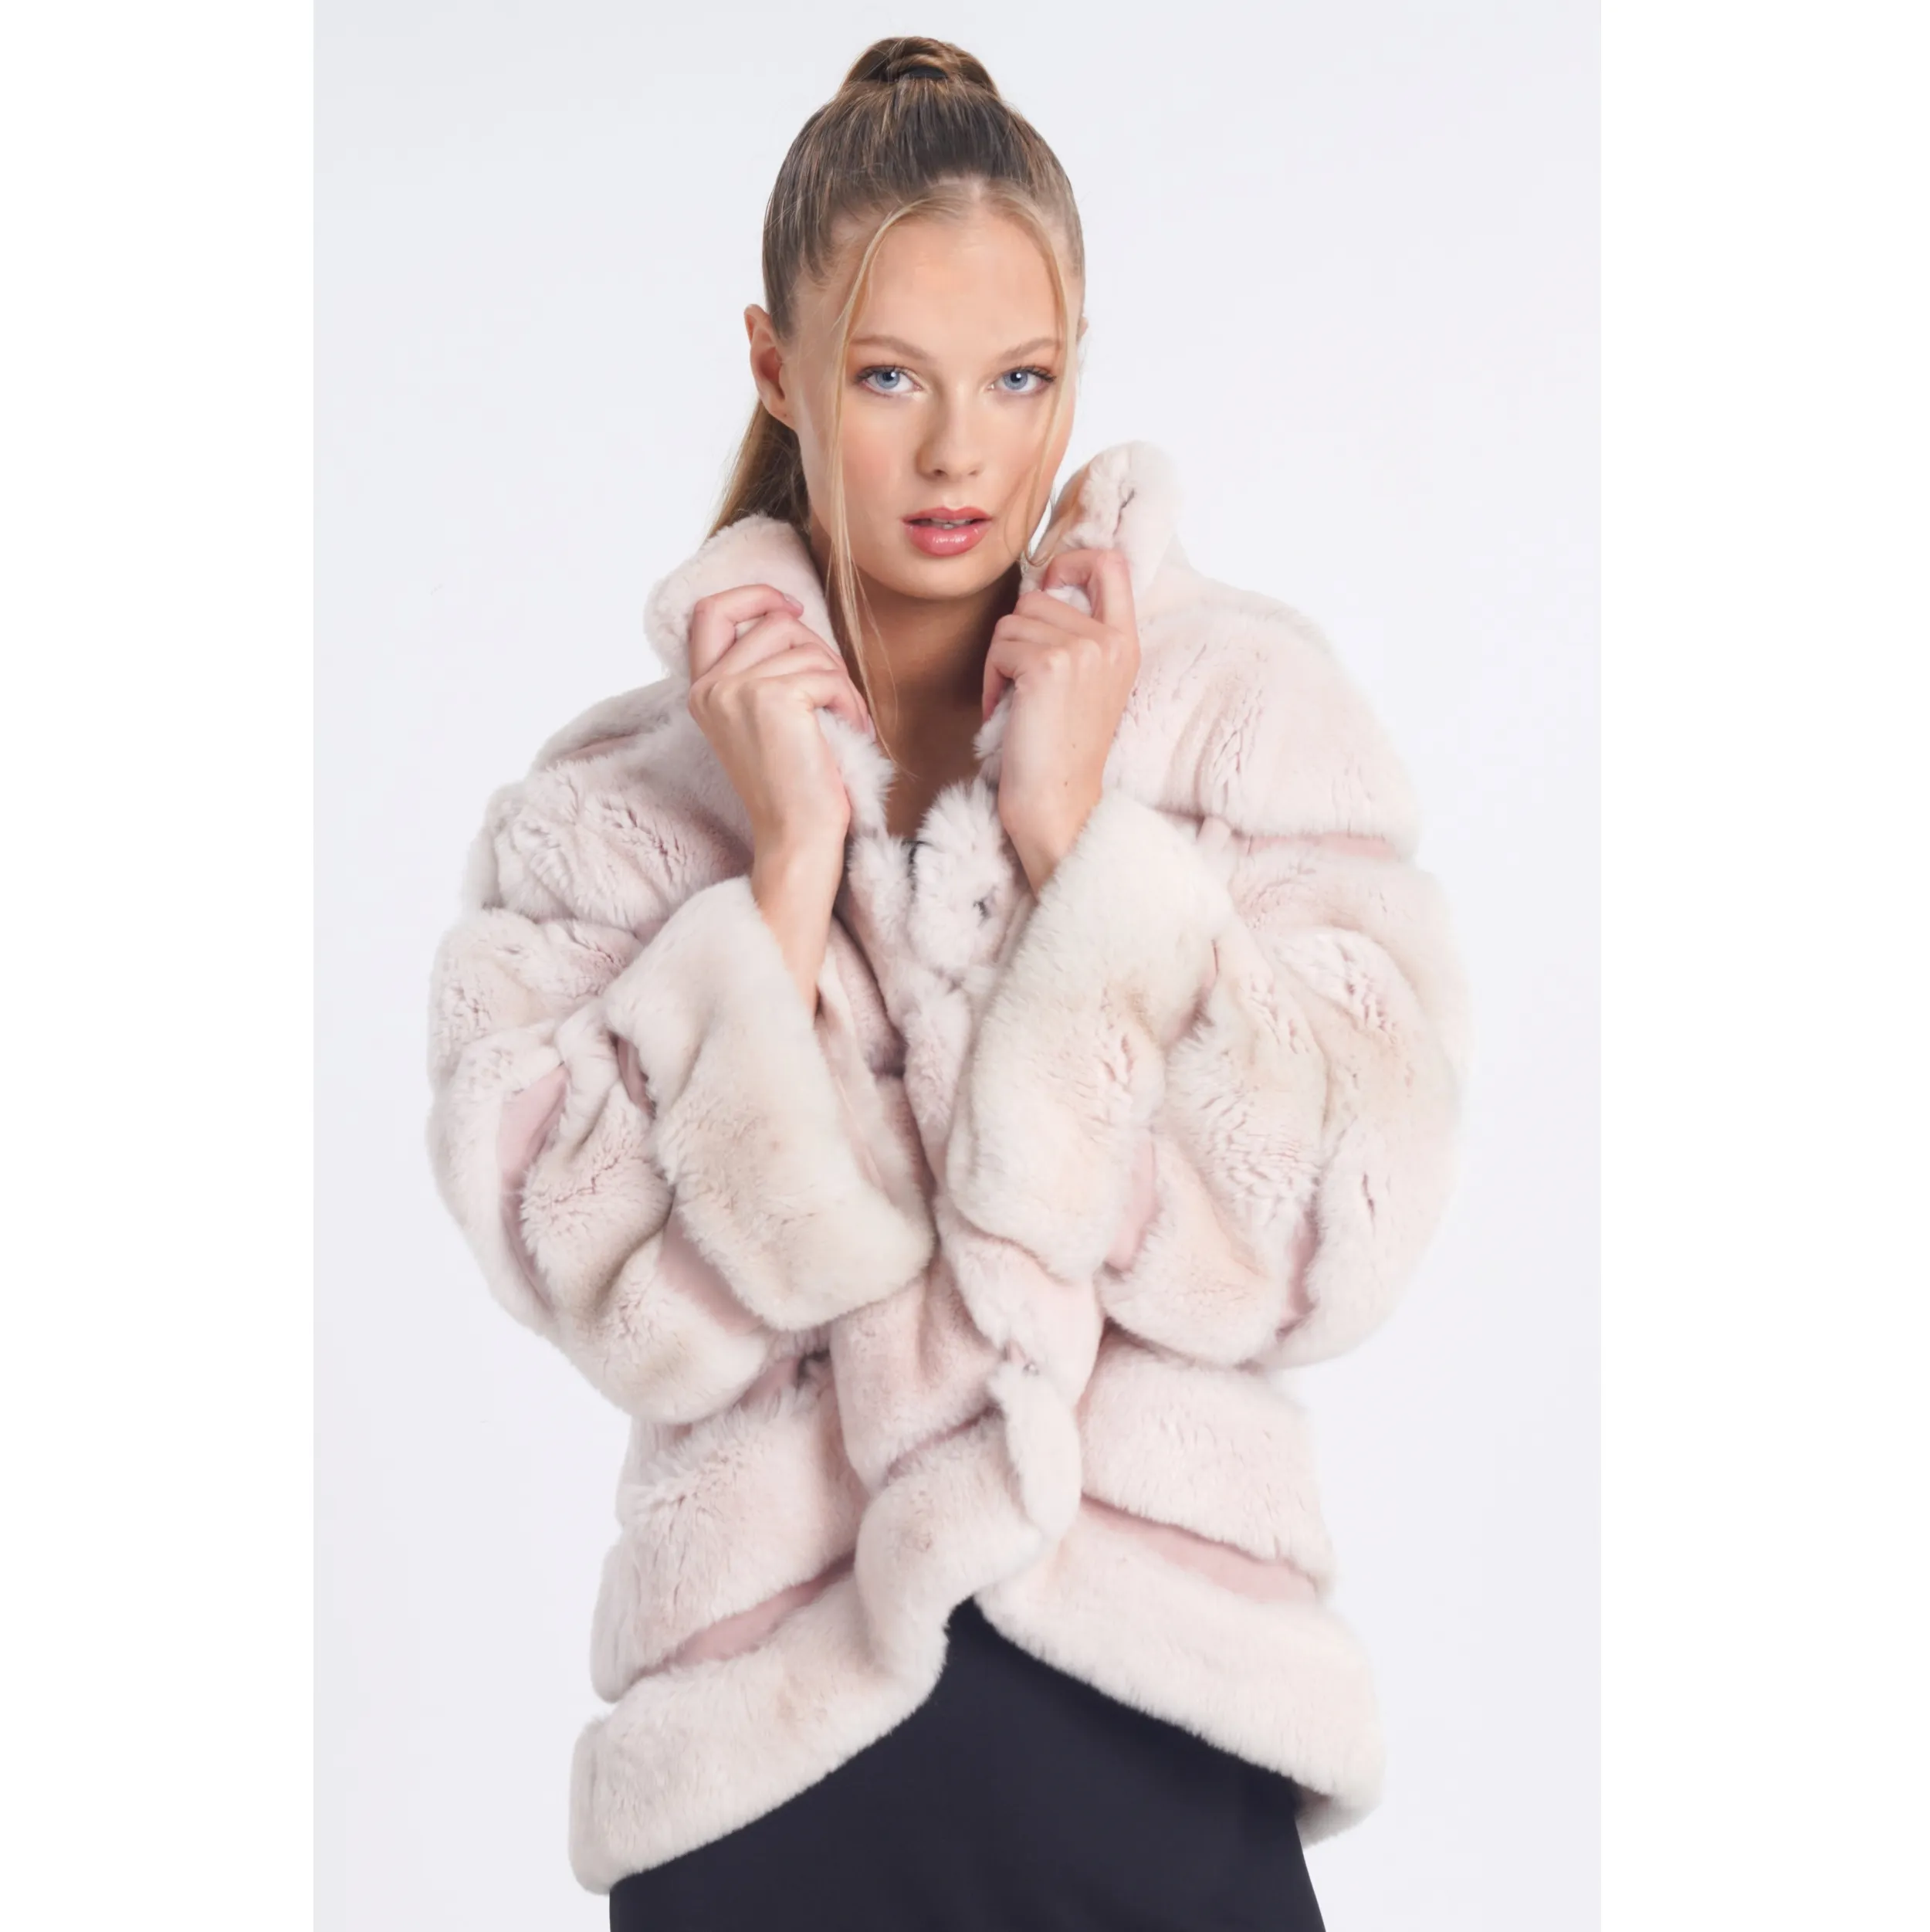 Buy 100 % Australian Sheepskin Cotton Candy Dream Leather Coat Available At Market Price